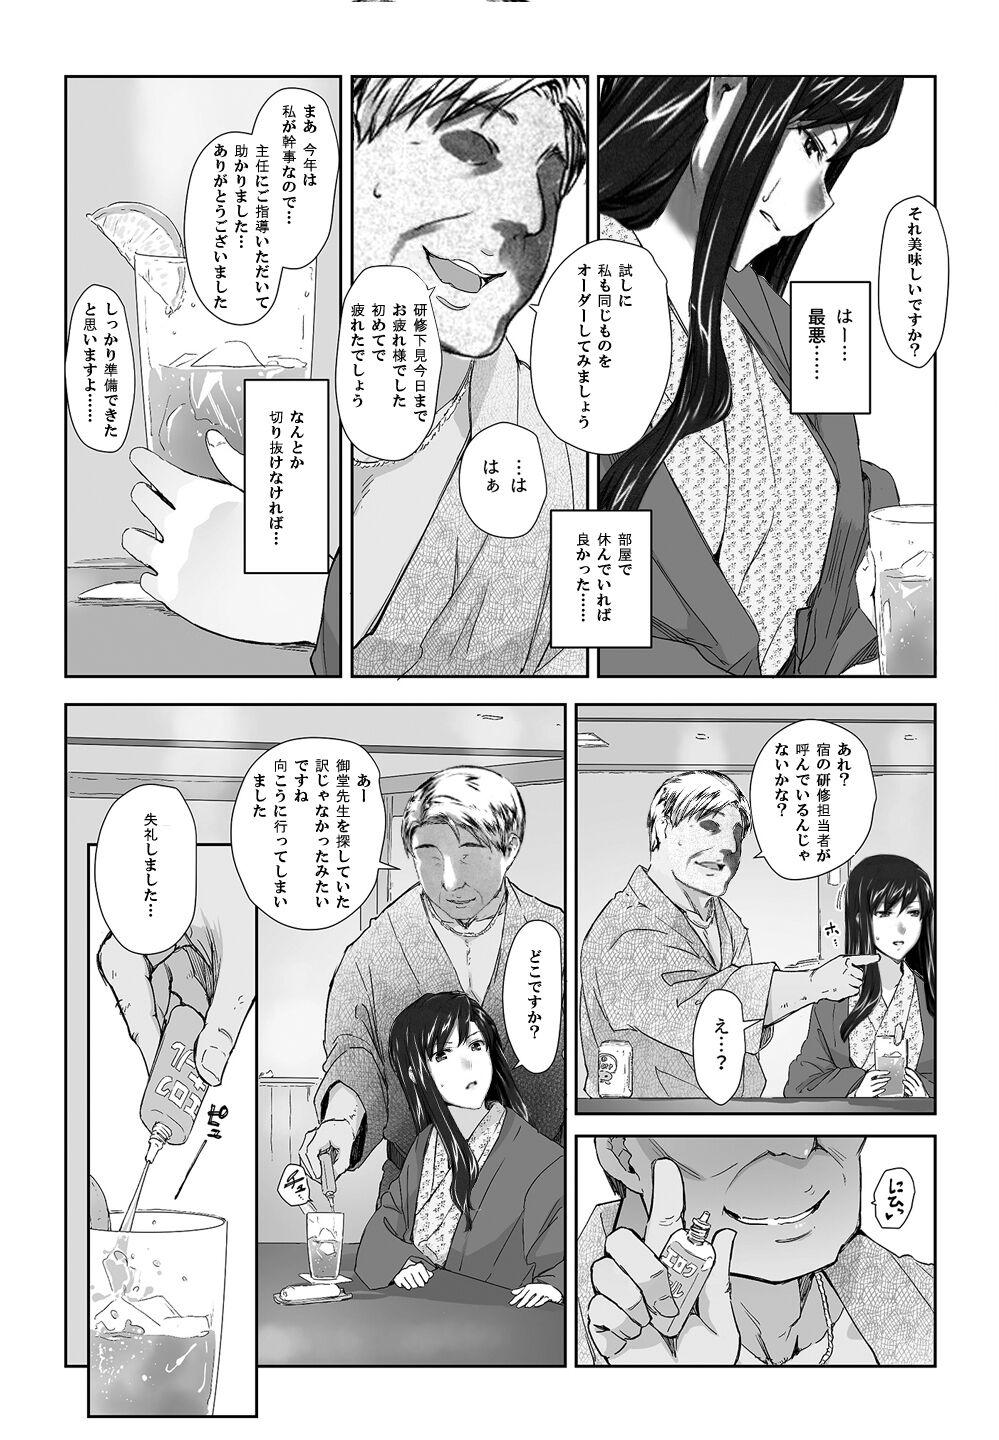 Sakiko-san in delusion Vol.8 revised ~Sakiko-san's circumstance at an educational training Route3~ (collage) (Continue to “First day of study trip” (page 42) of Vol.1) 3